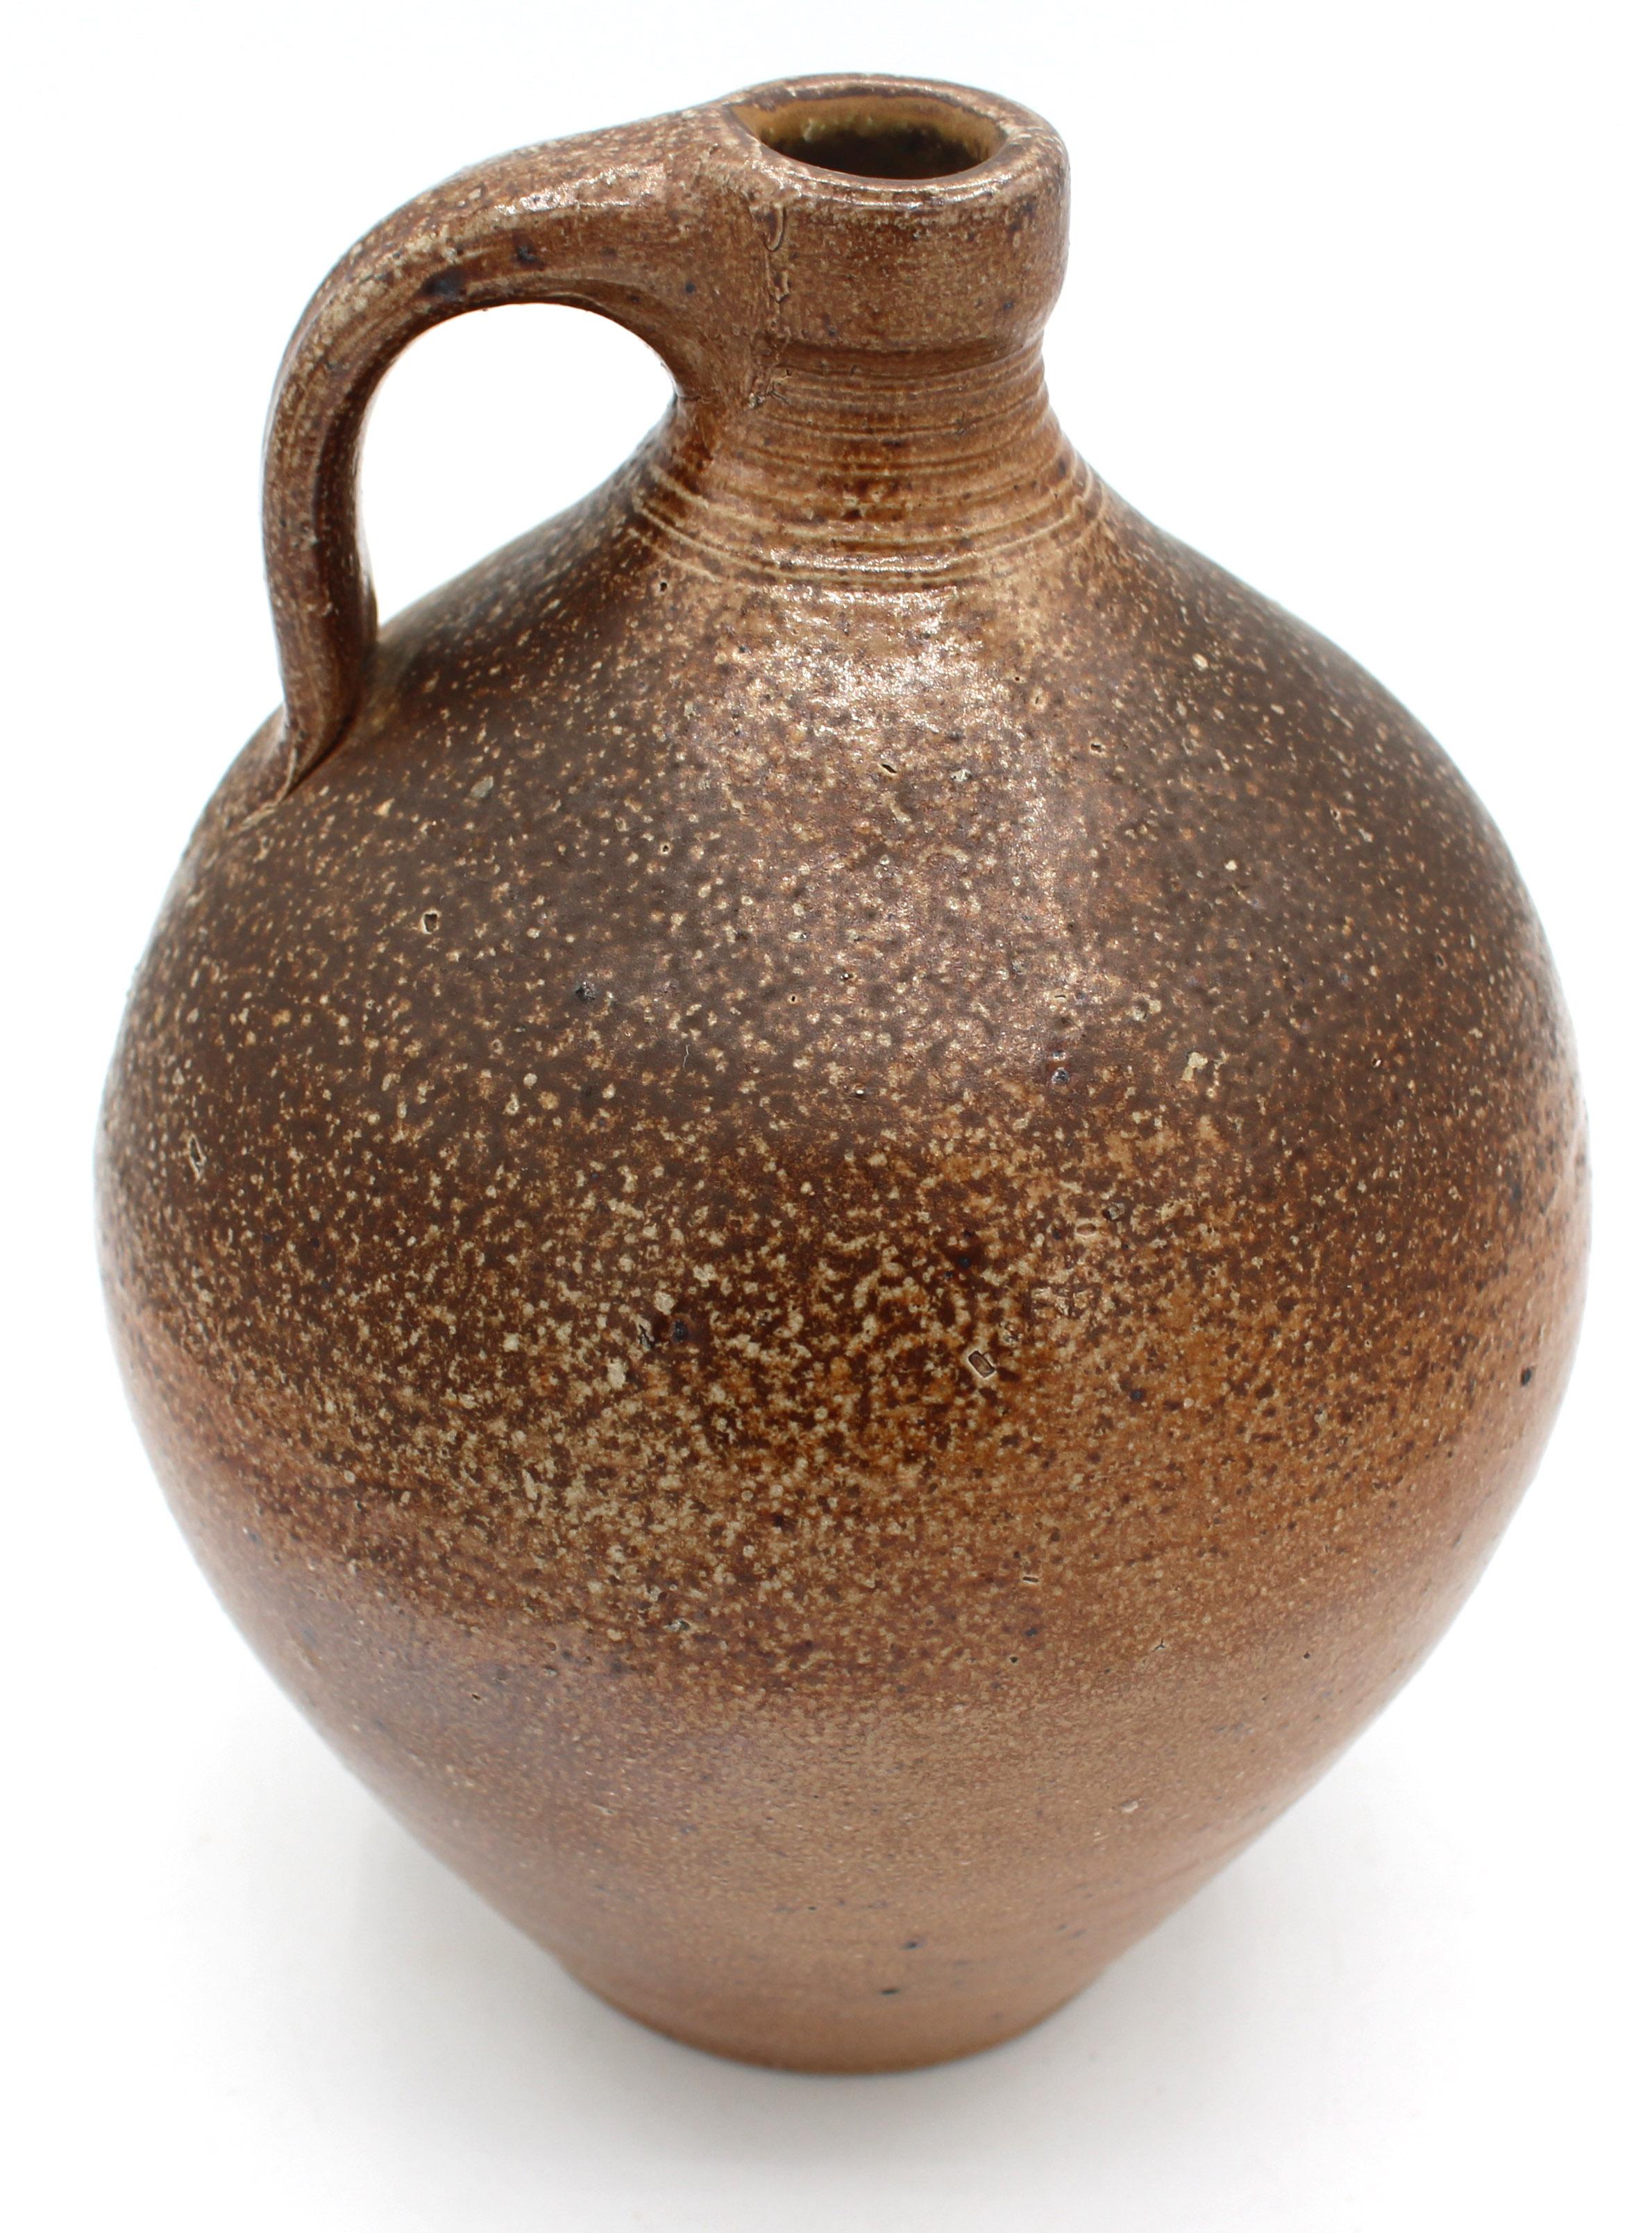 1984-1995 Speckled Brown Mark Hewitt Pottery Jug In Good Condition For Sale In Chapel Hill, NC